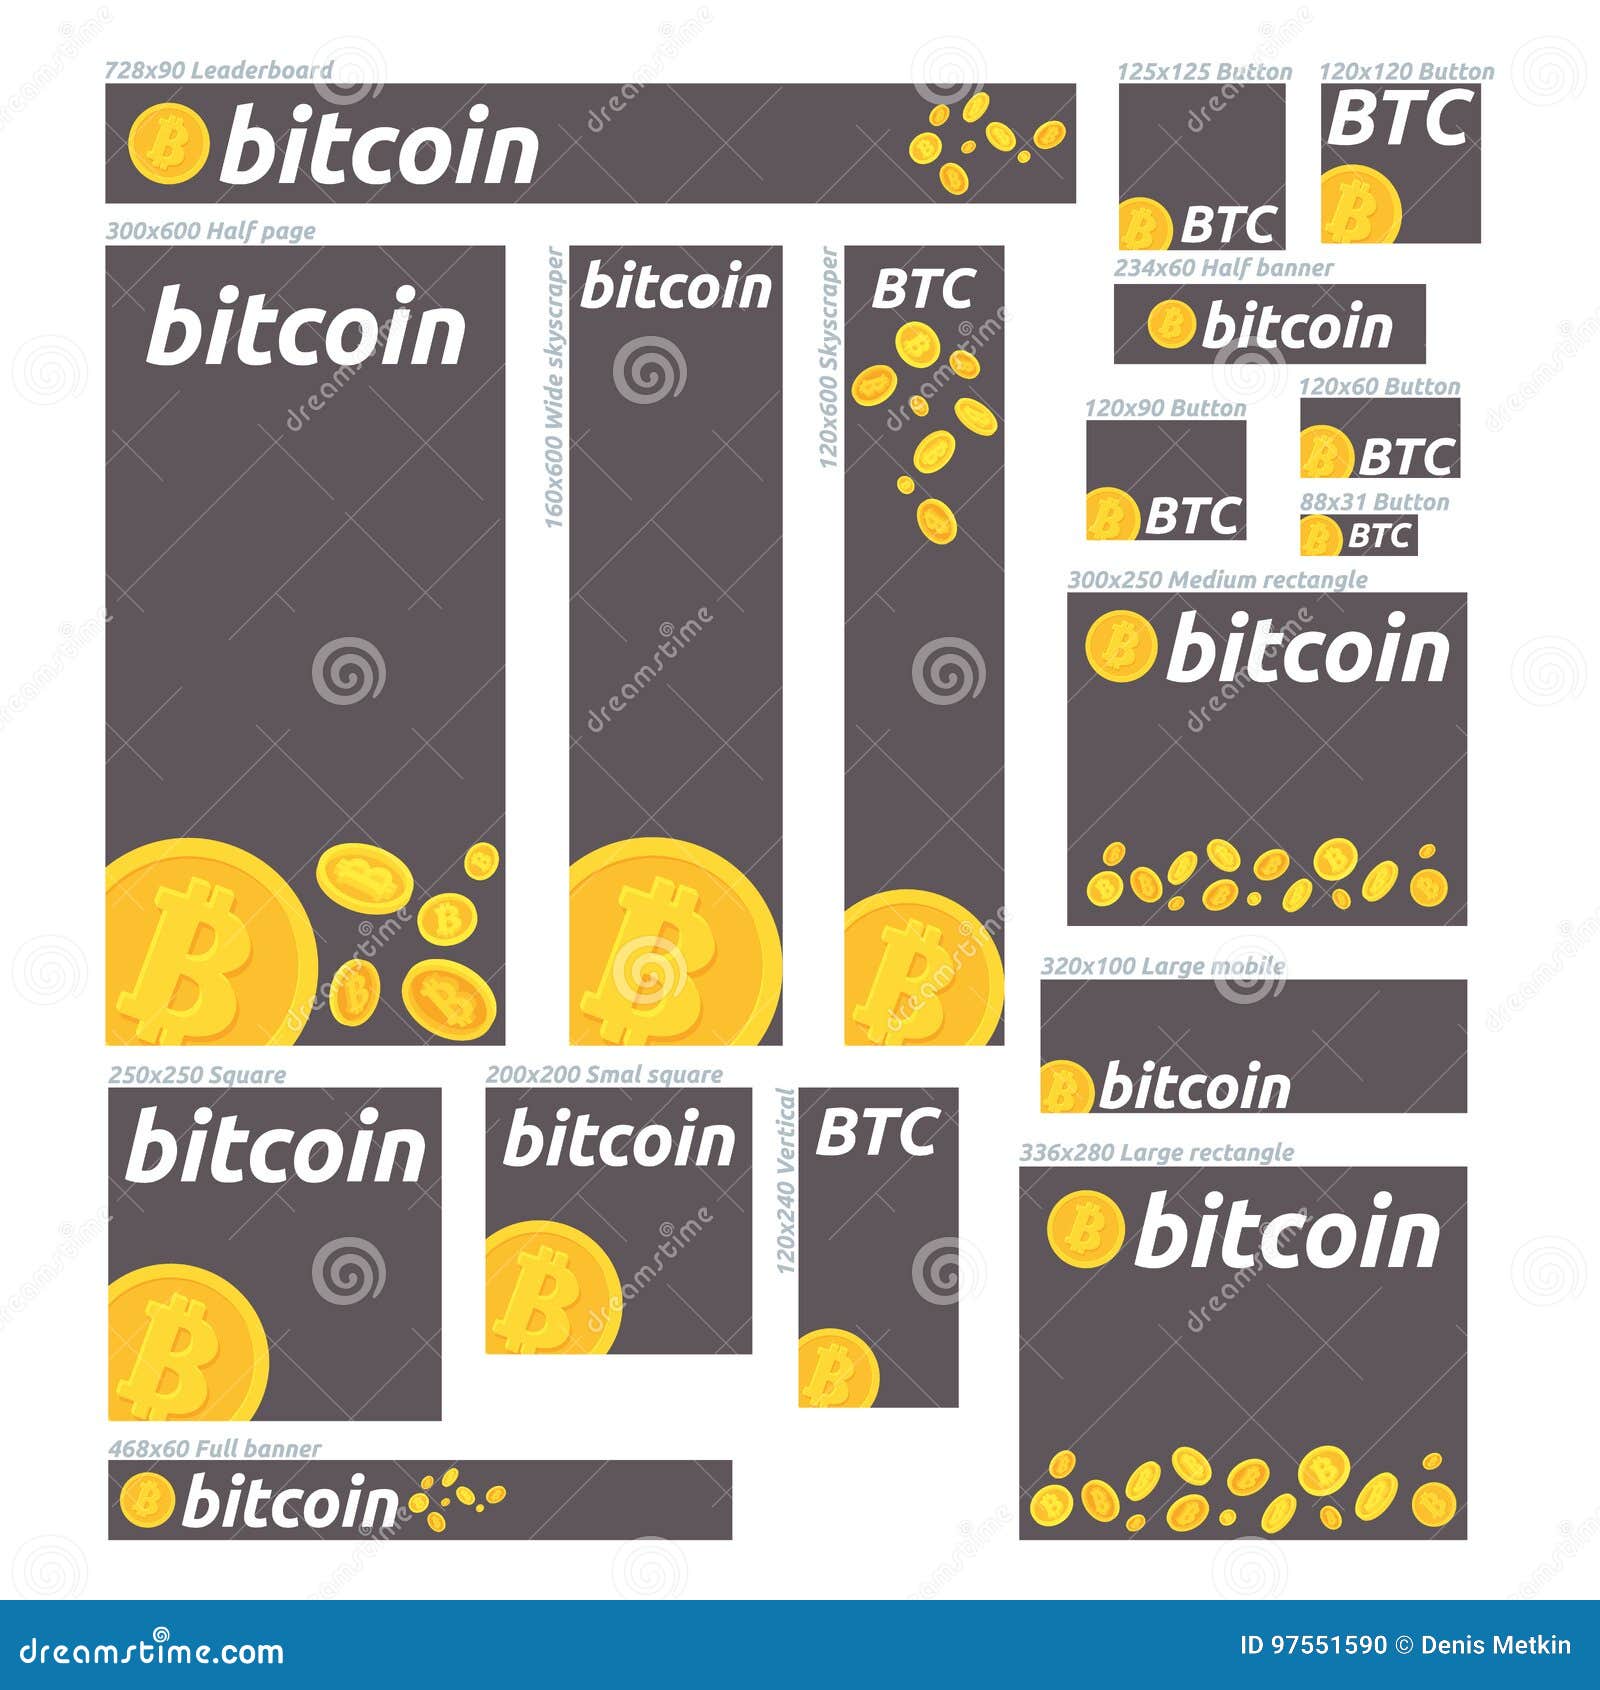 Bitcoin Digital Currency Banner Set Banners For Bitcoin Stock - 